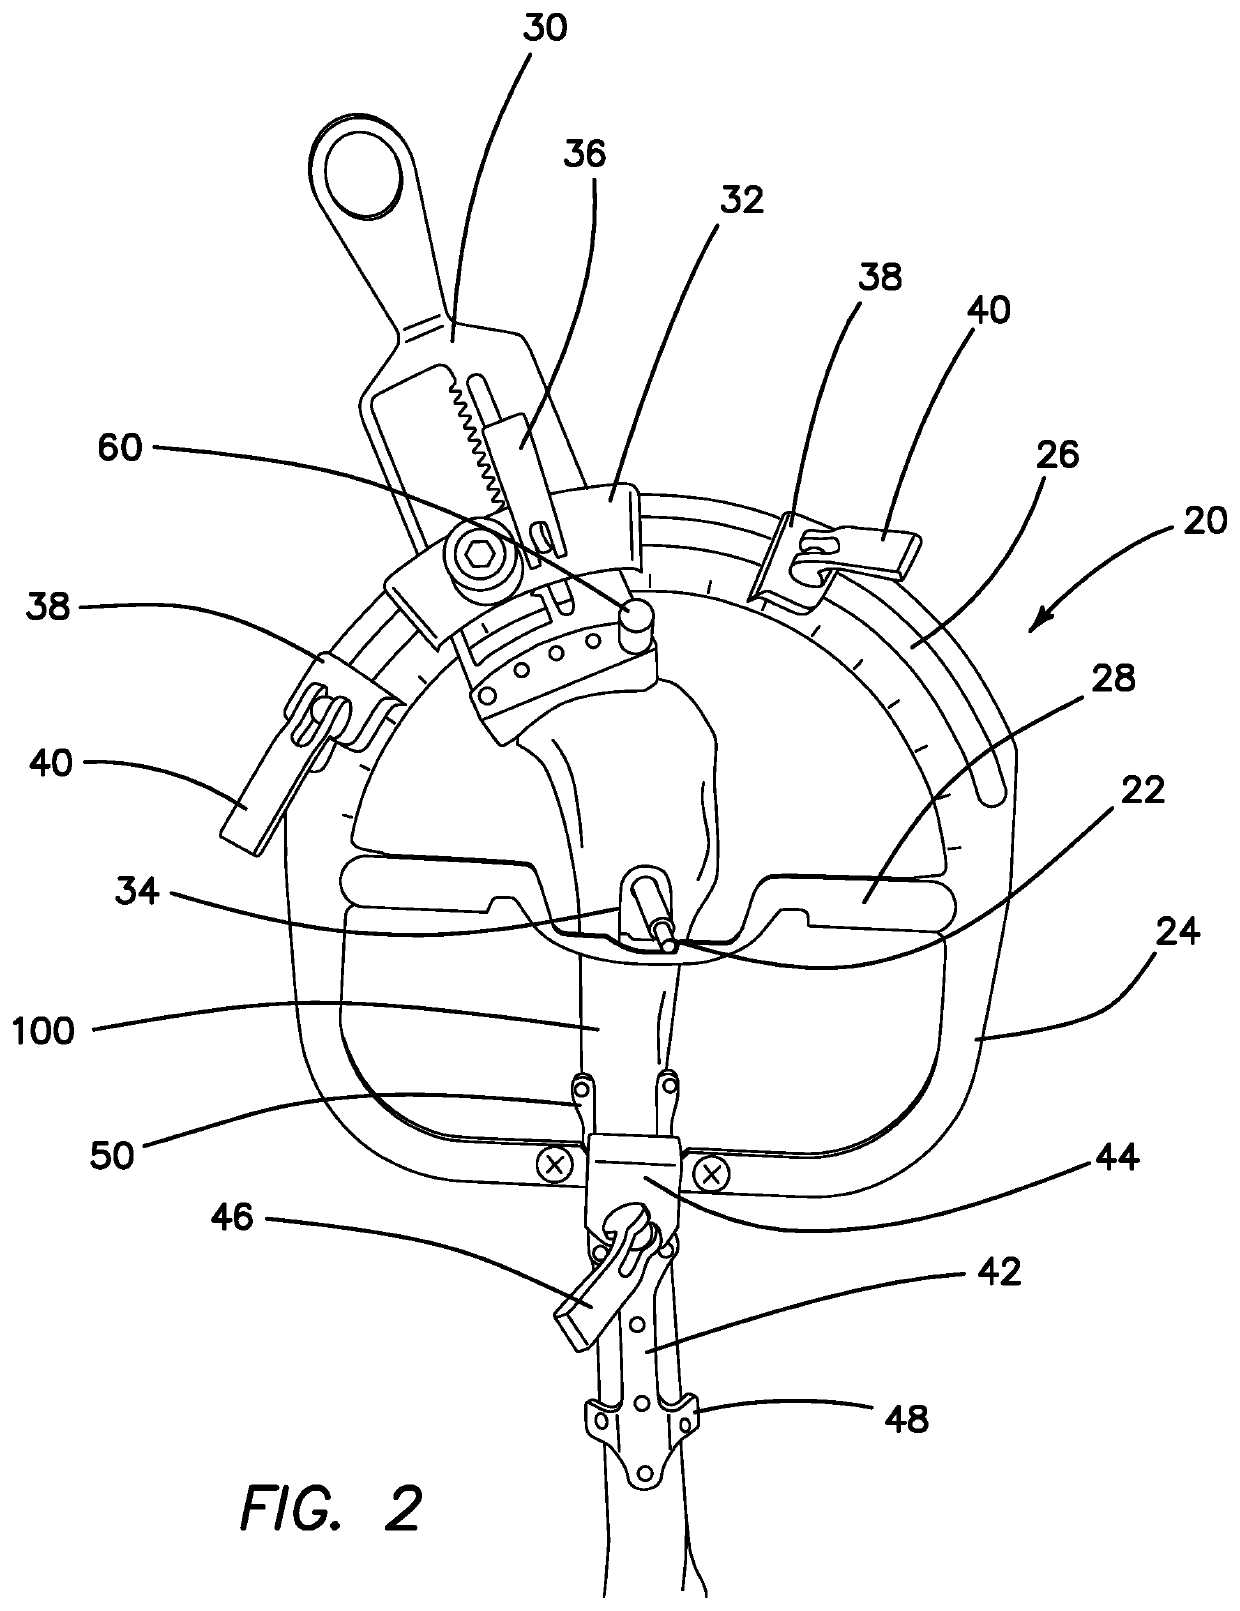 Method and Apparatus for Treating Cranial Cruciate Ligament Disease in Canines